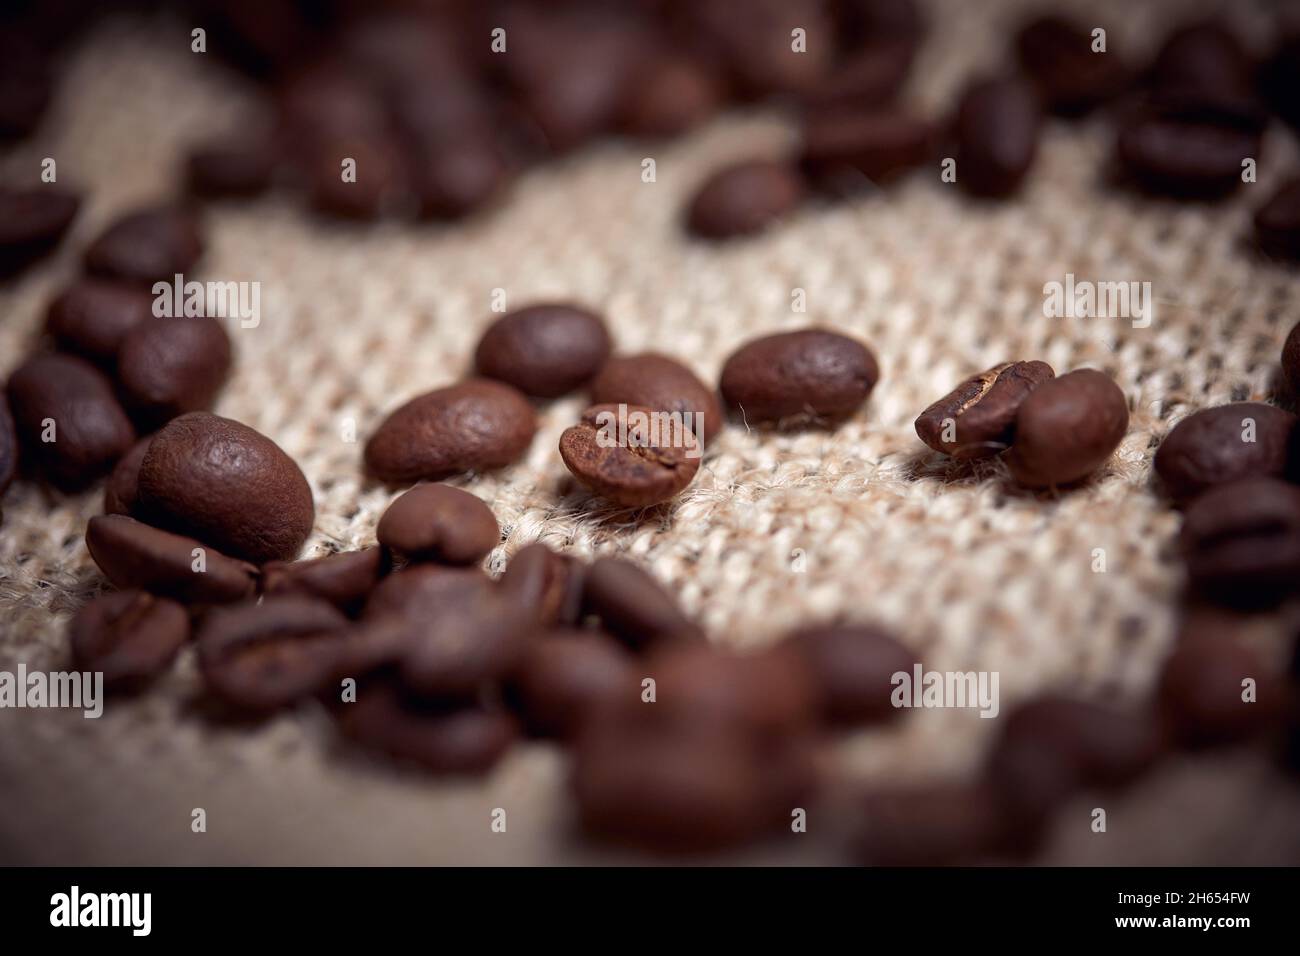 Close-up of aromatic and fragrant roasted coffee beans spread over the bag. Coffee, beans Stock Photo